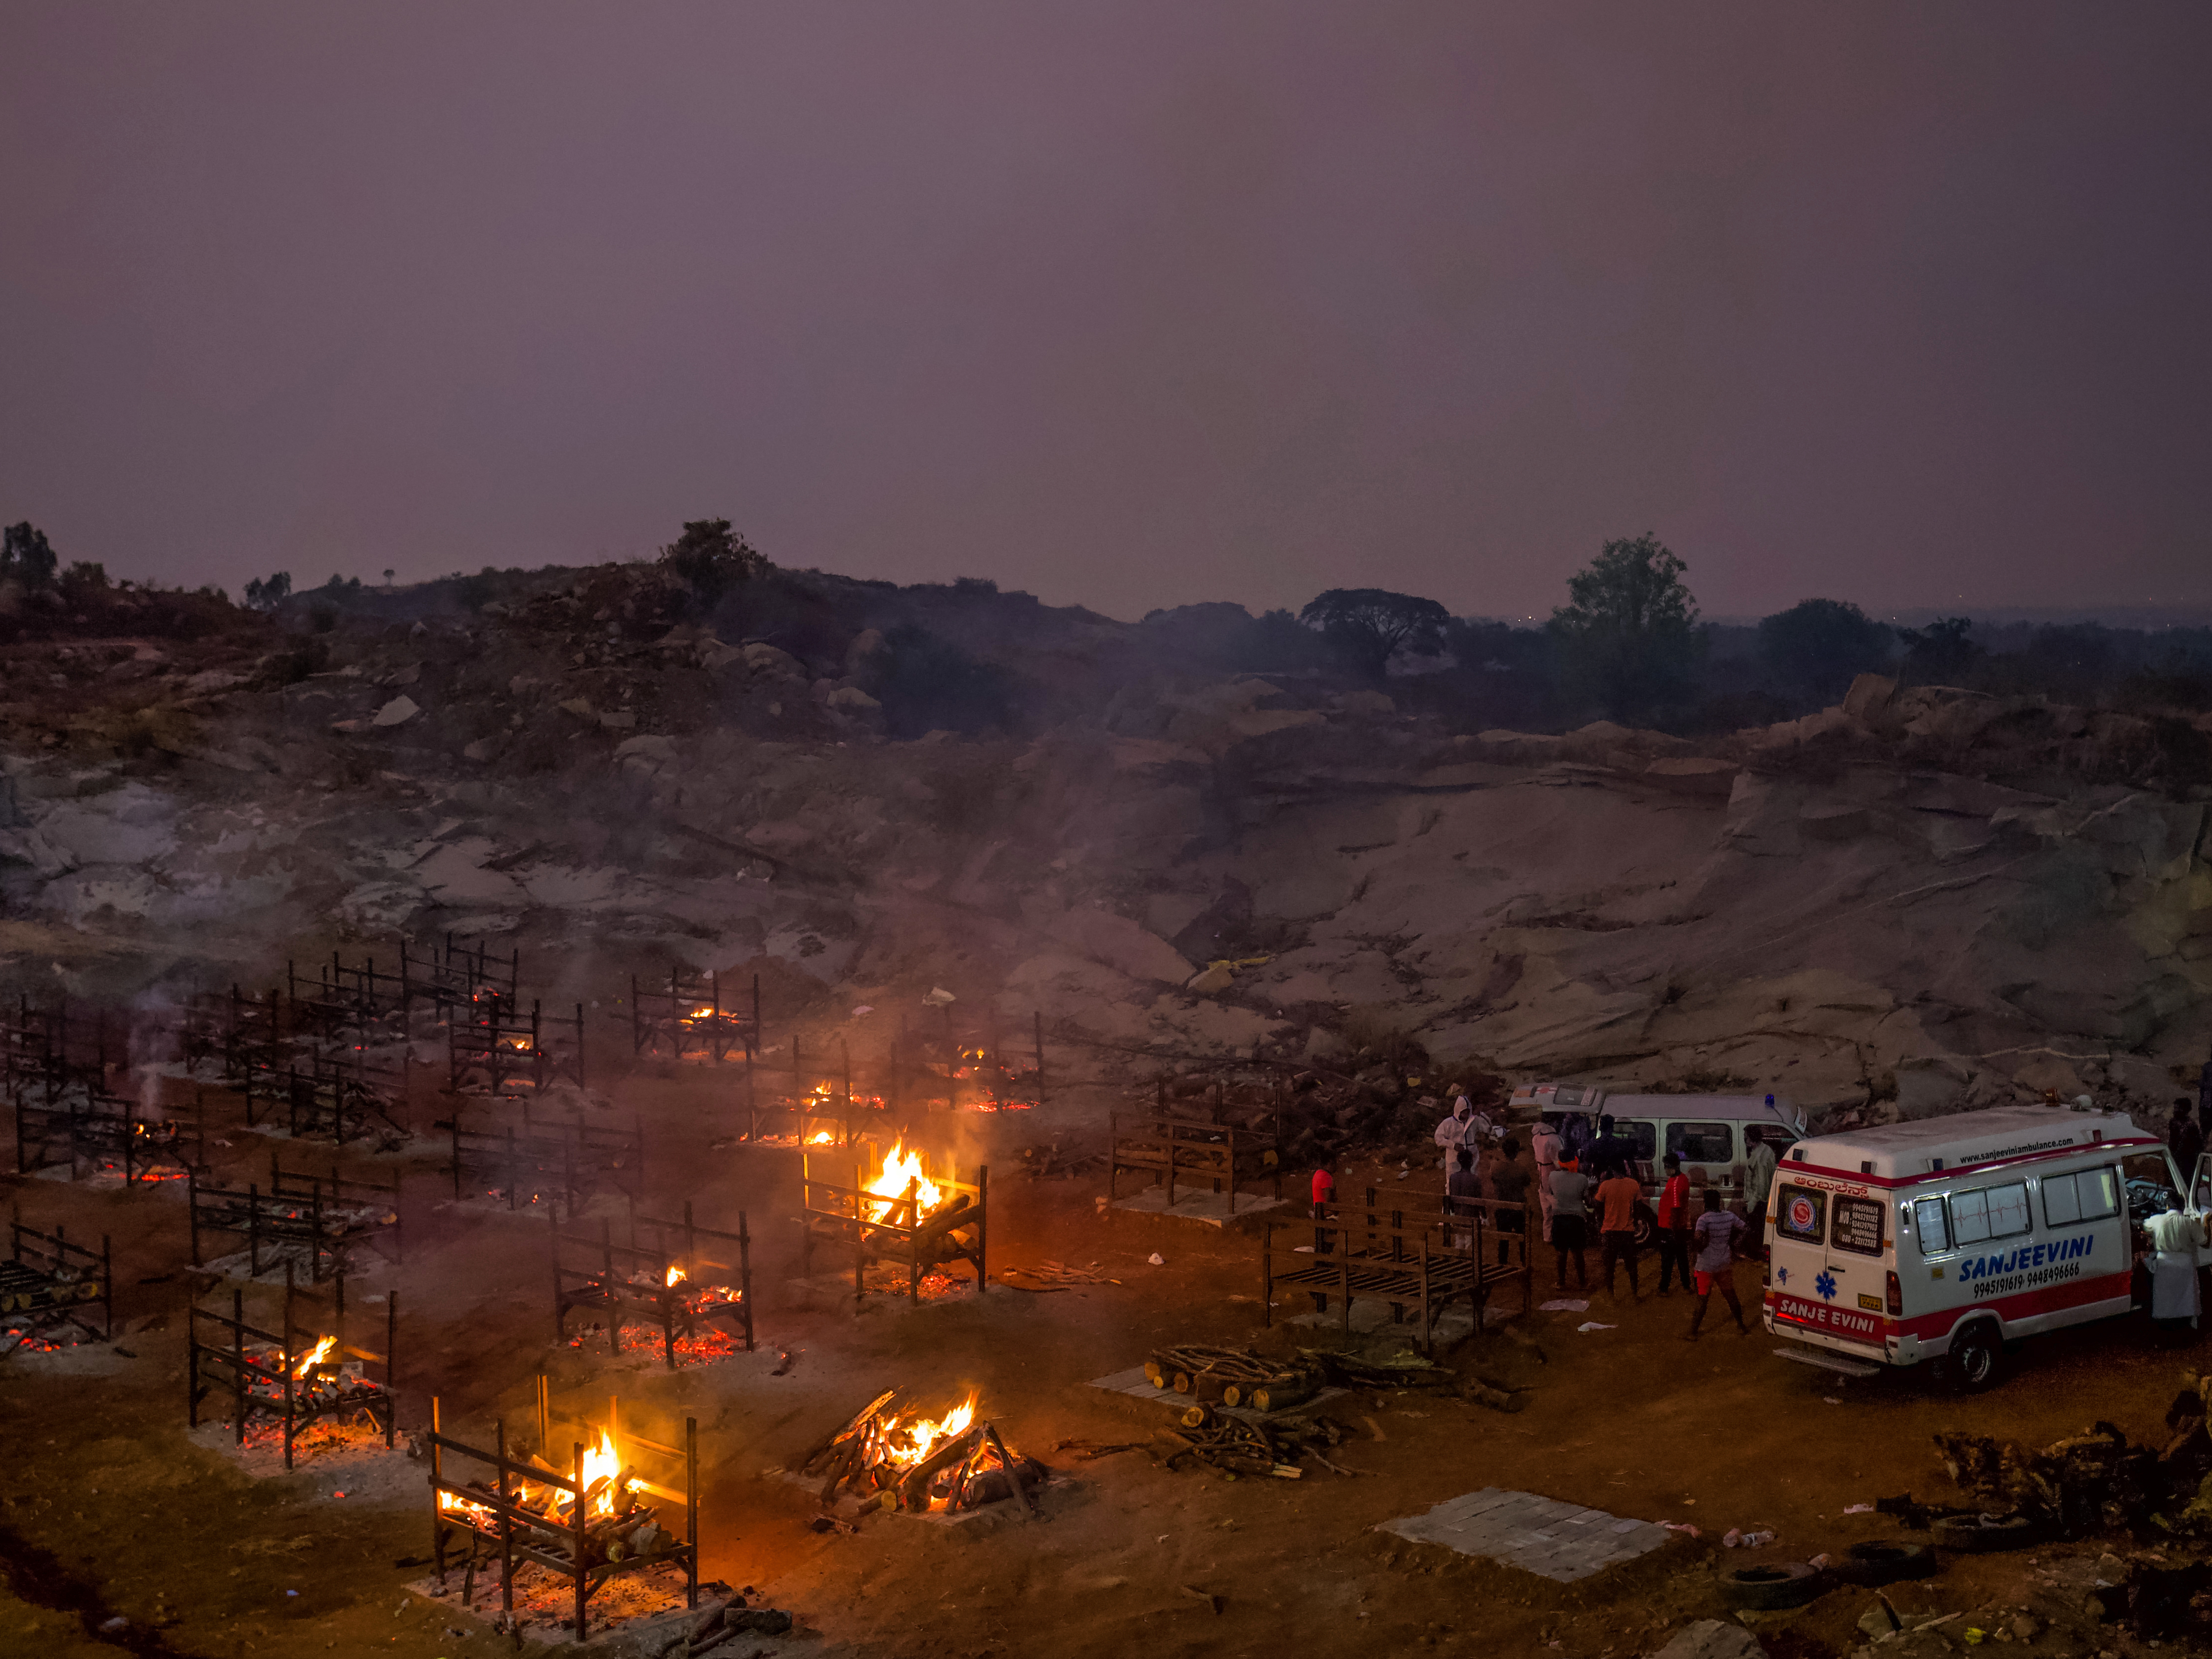 Funeral pyres burn in a disused granite quarry repurposed to cremate the dead due to COVID-19 on Friday in Bengaluru, India. The U.S. is set to impose new travel restrictions against travelers from the country. CREDIT: Abhishek Chinnappa/Getty Images